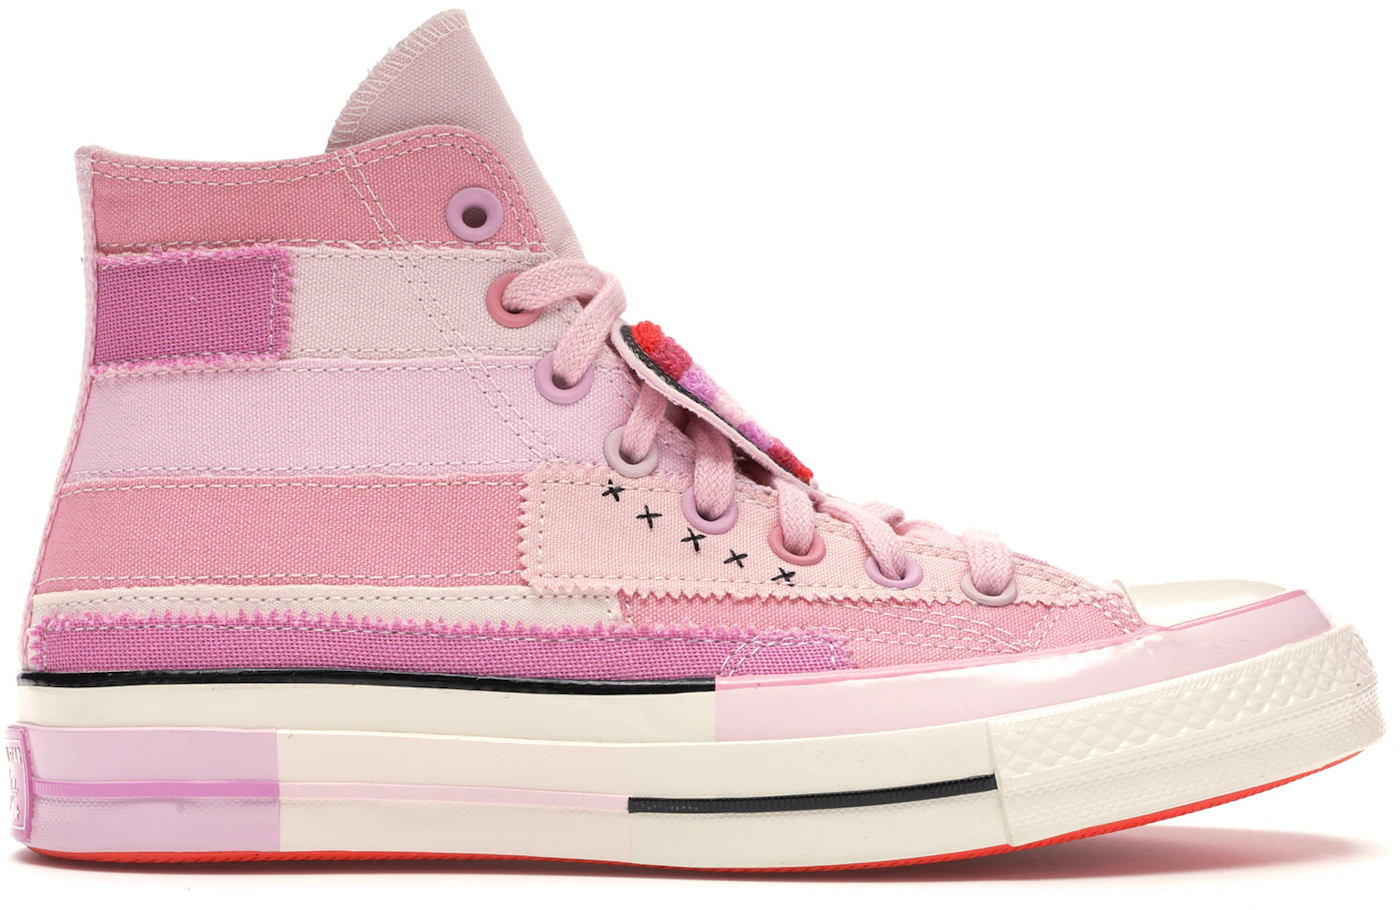 sexo arrepentirse inquilino Converse Chuck Taylor All-Star 70 Hi Millie Bobby Brown - 167298C - US